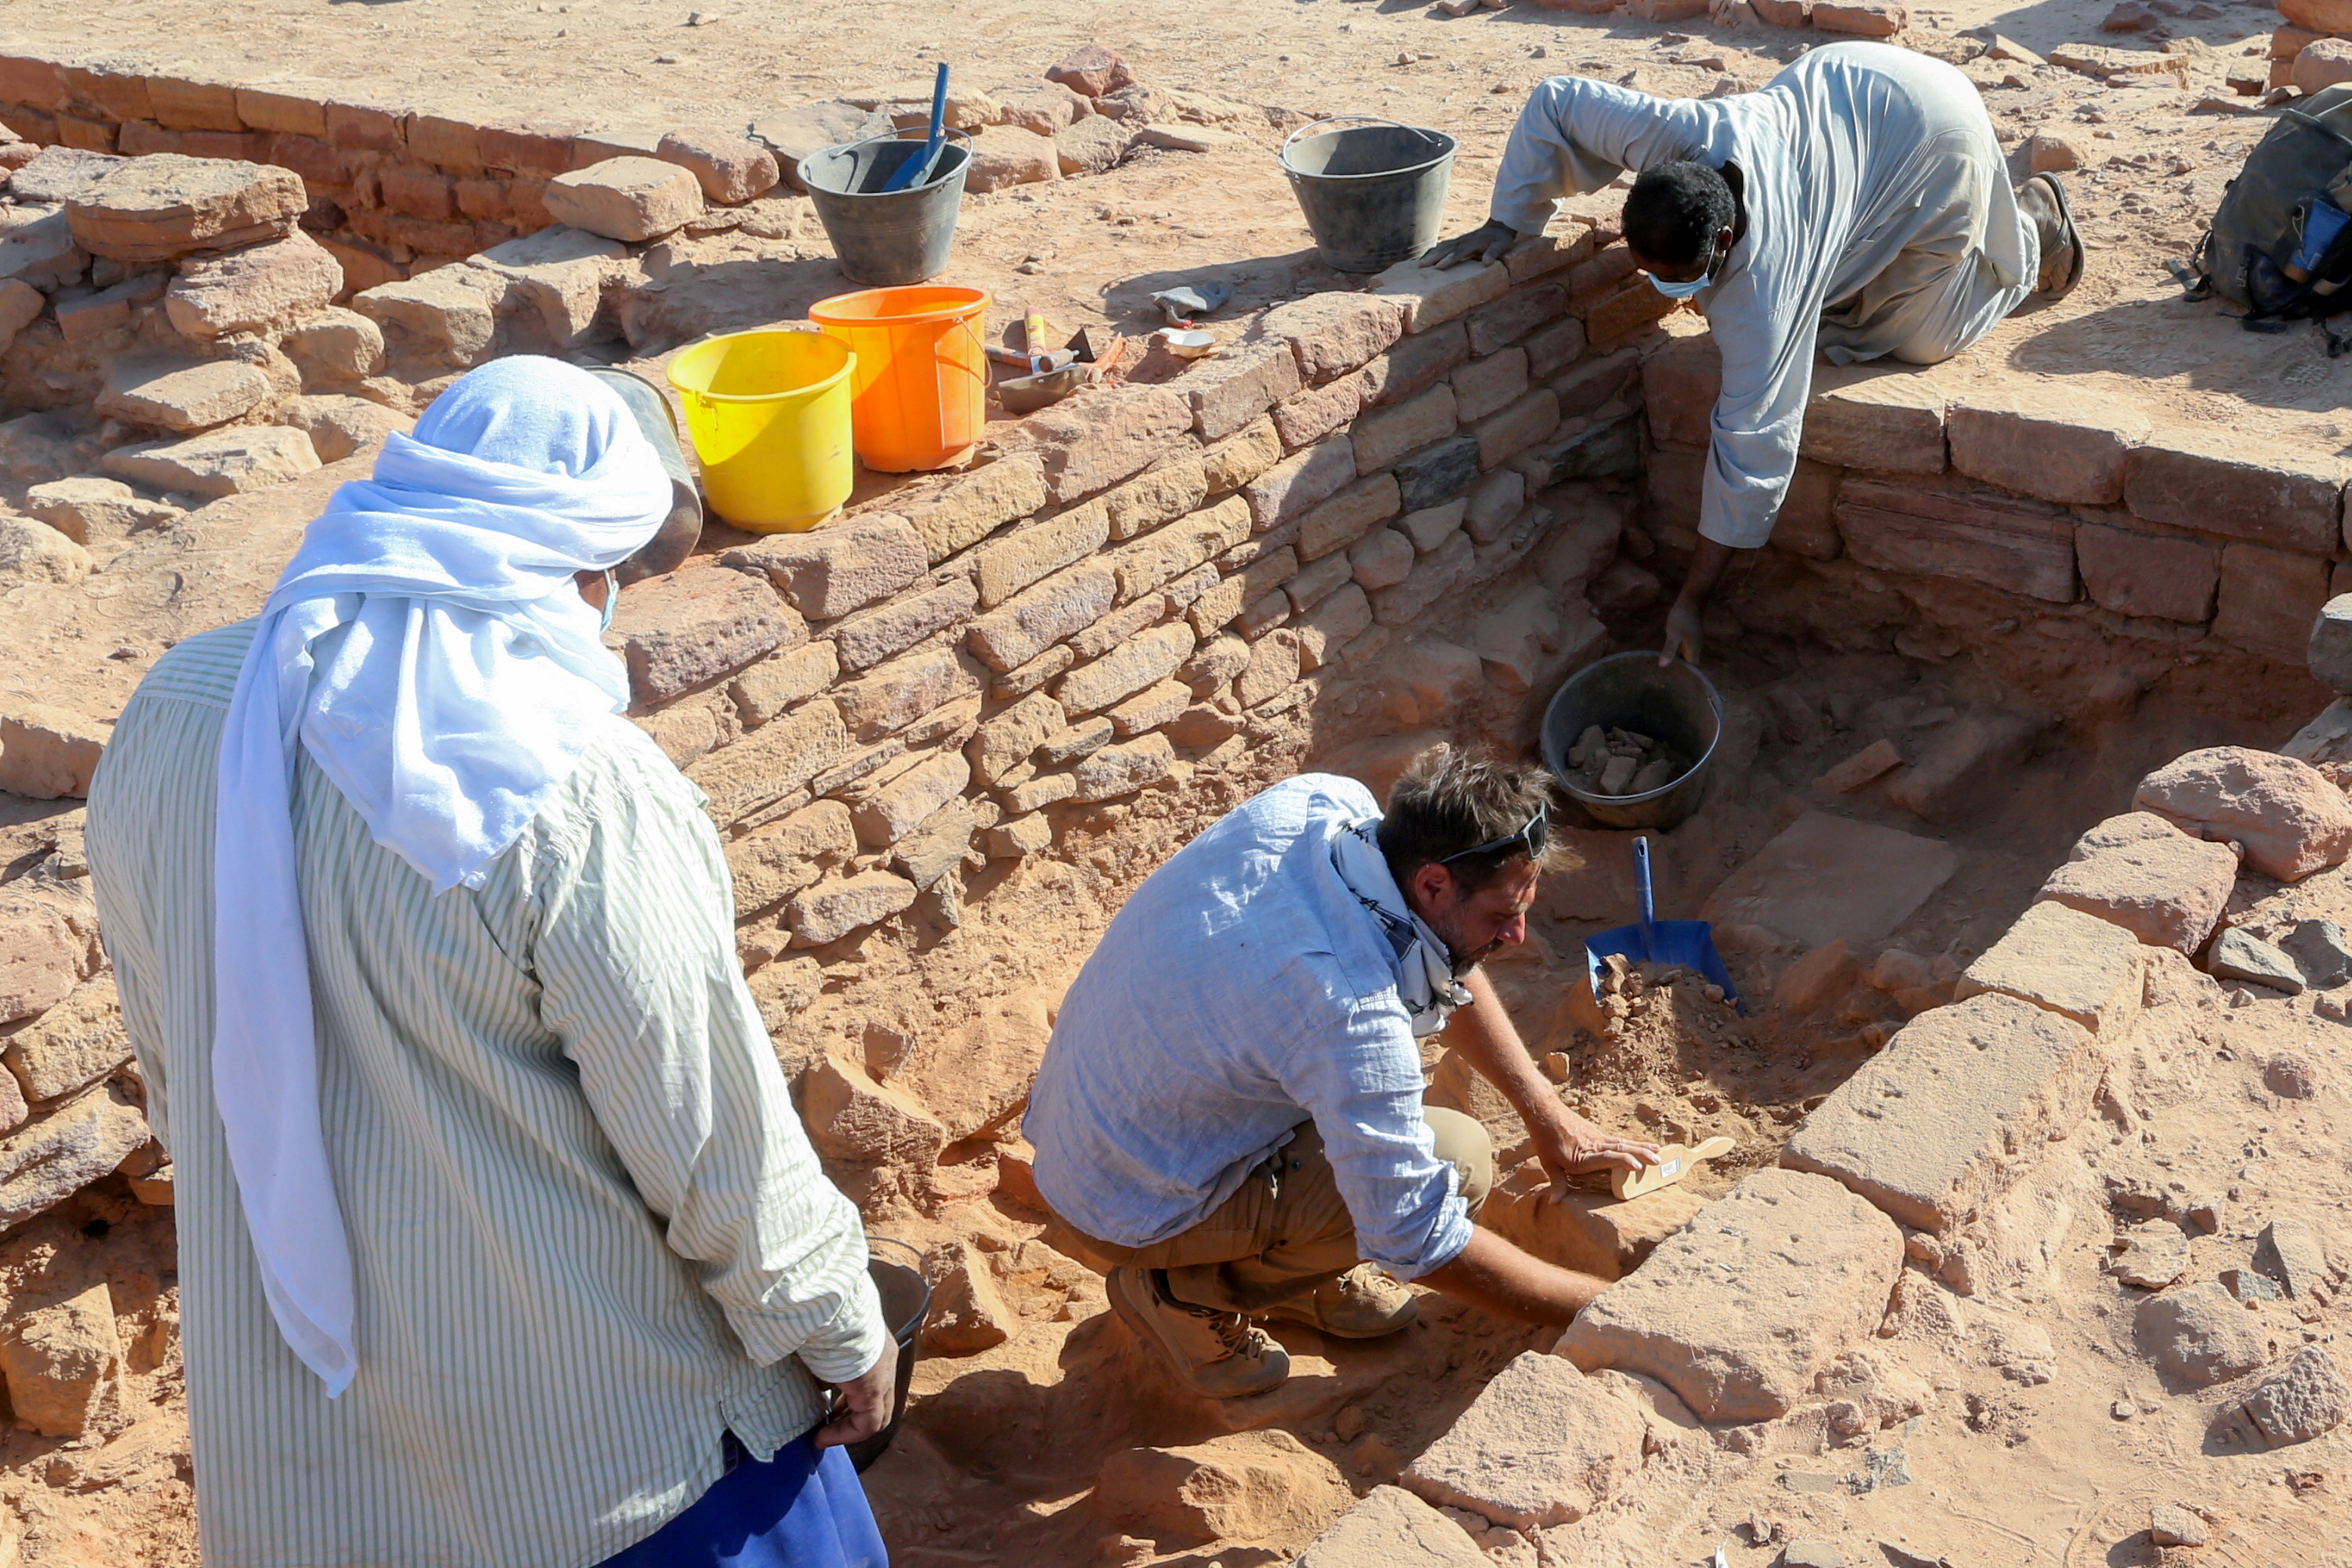 A French archaeologist and his co-workers carefully clean the pottery to examine the findings known to be from Dadan and Lihyan civilisation dated back to the second half of the first millennium BC, in Al-Ula, Saudi Arabia October 30, 2021. REUTERS/Ahmed Yosri